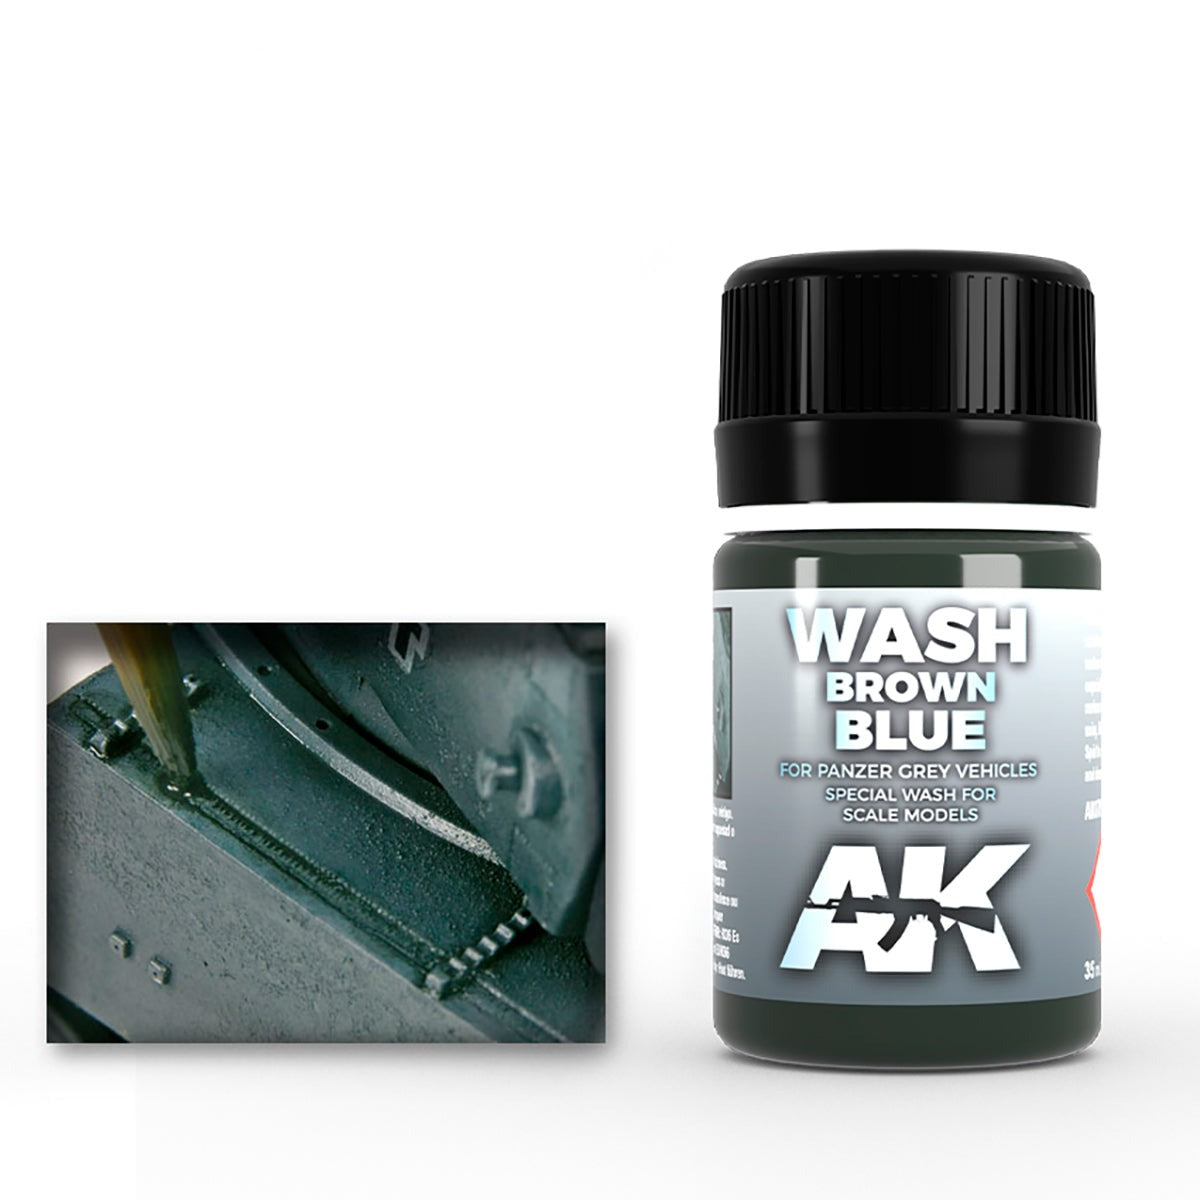 Wash for Panzer Grey Vehicles - Loaded Dice